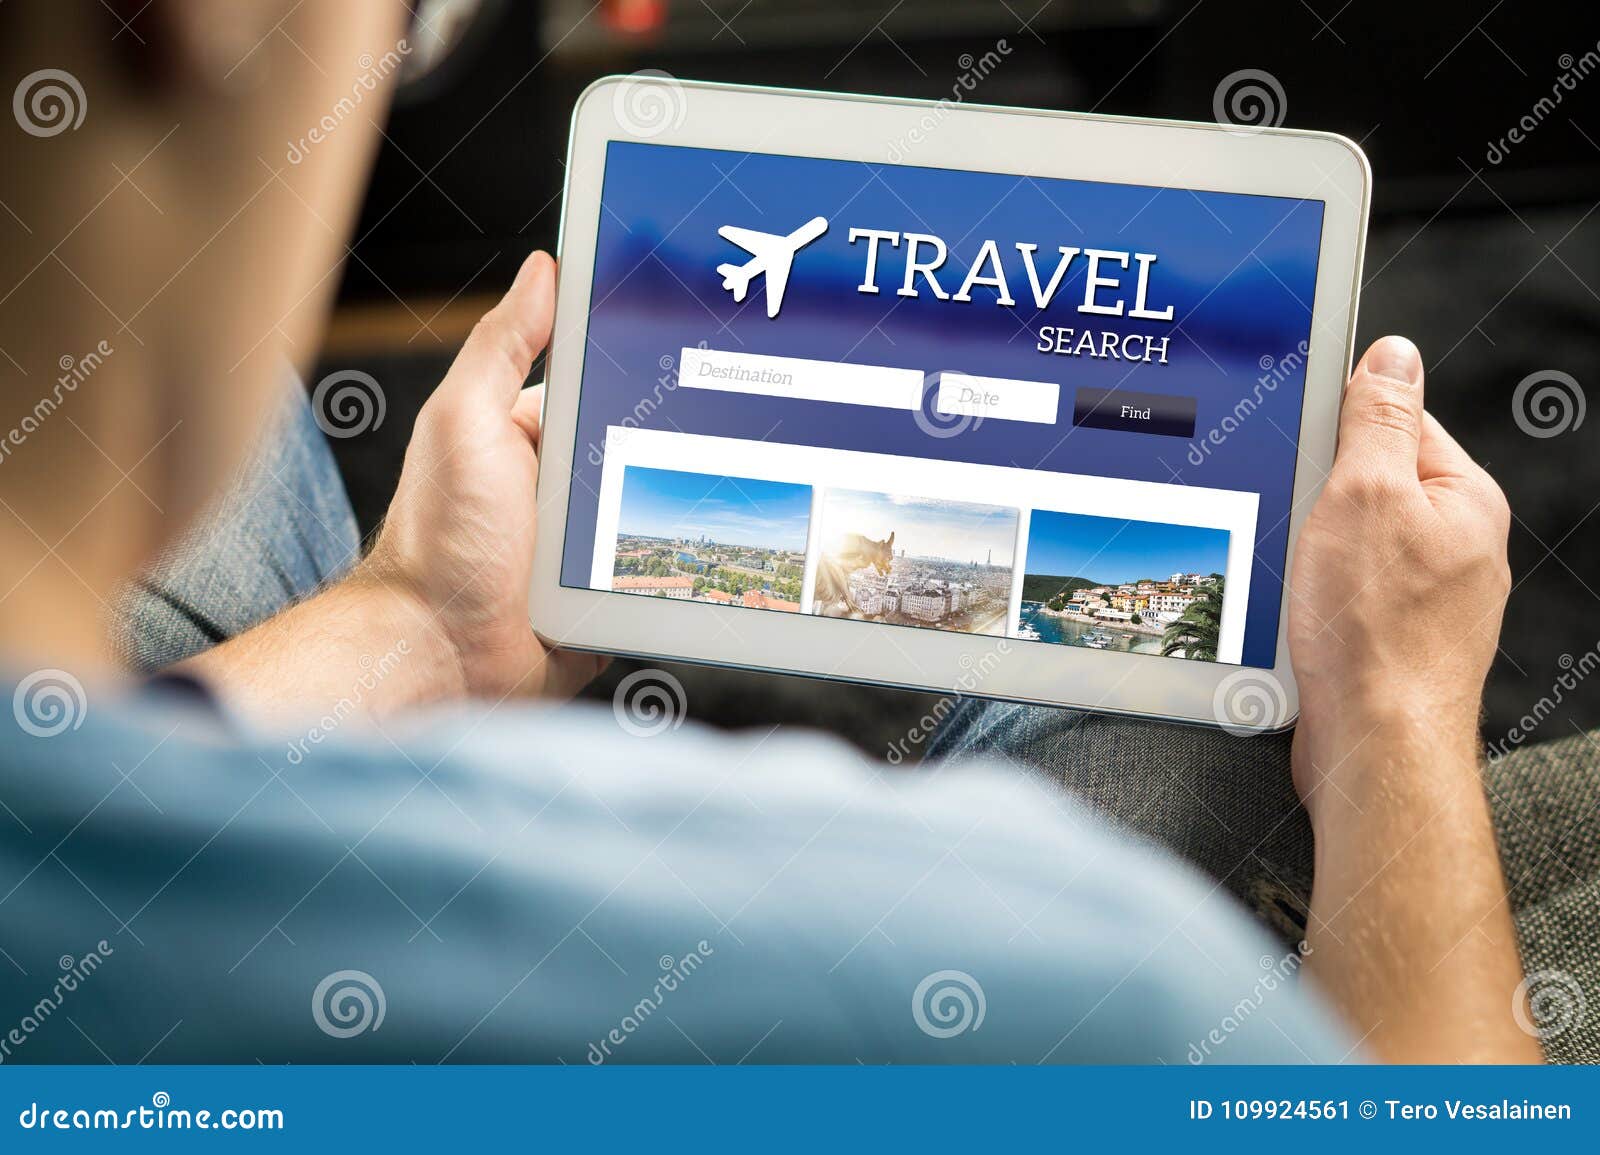 man searching cheap flights, hotel or holiday package online